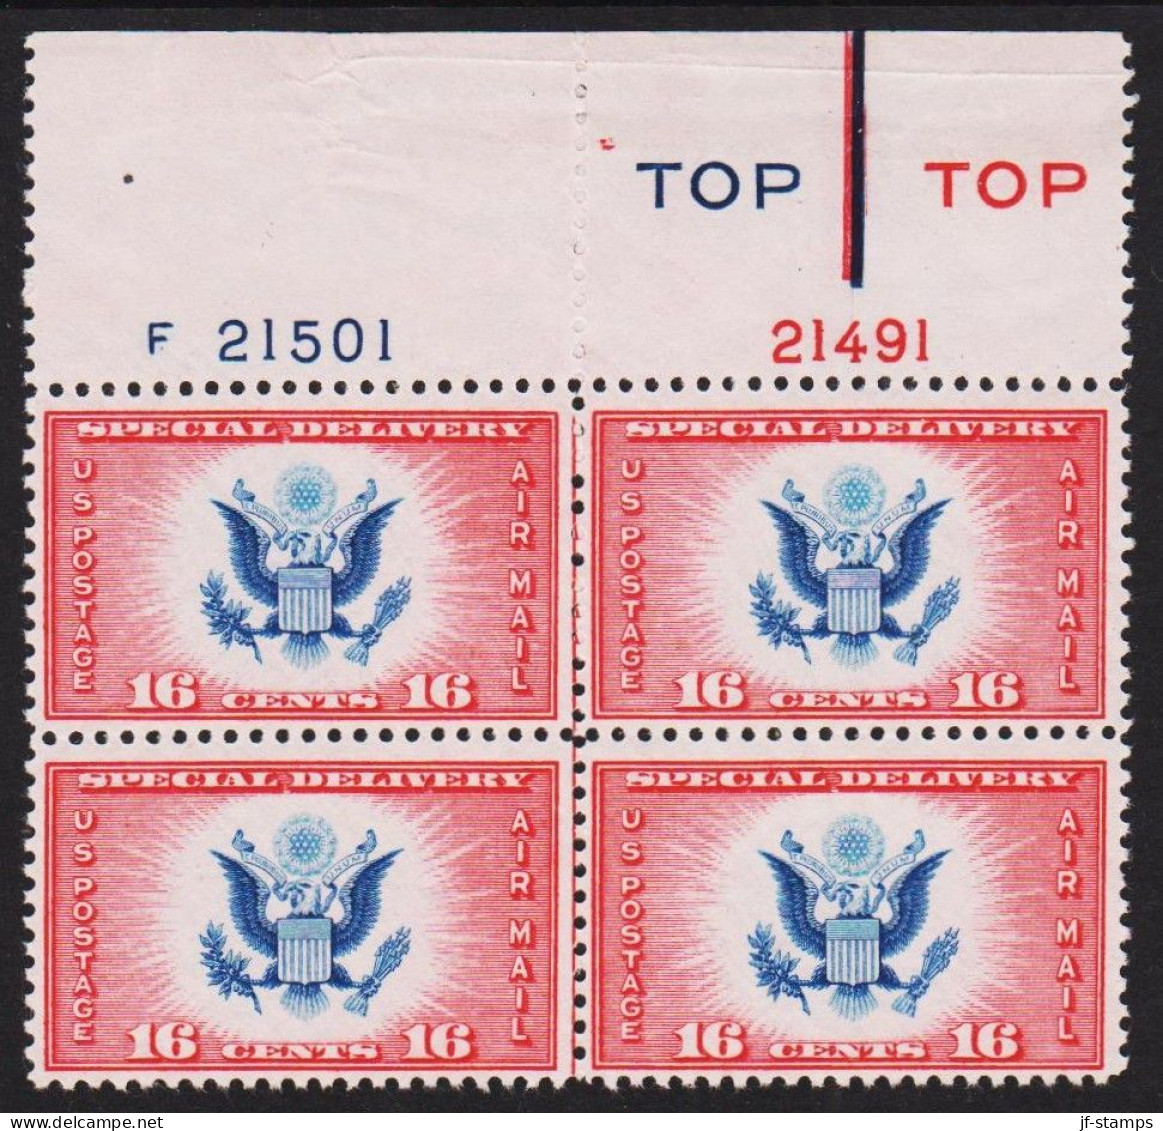 1936. USA. SPECIAL DELIVERY 16 CENTS 16. AIR MAIL, 4block Never Hinged.  Platenumber 21501 And 21491.  - JF542824 - Neufs